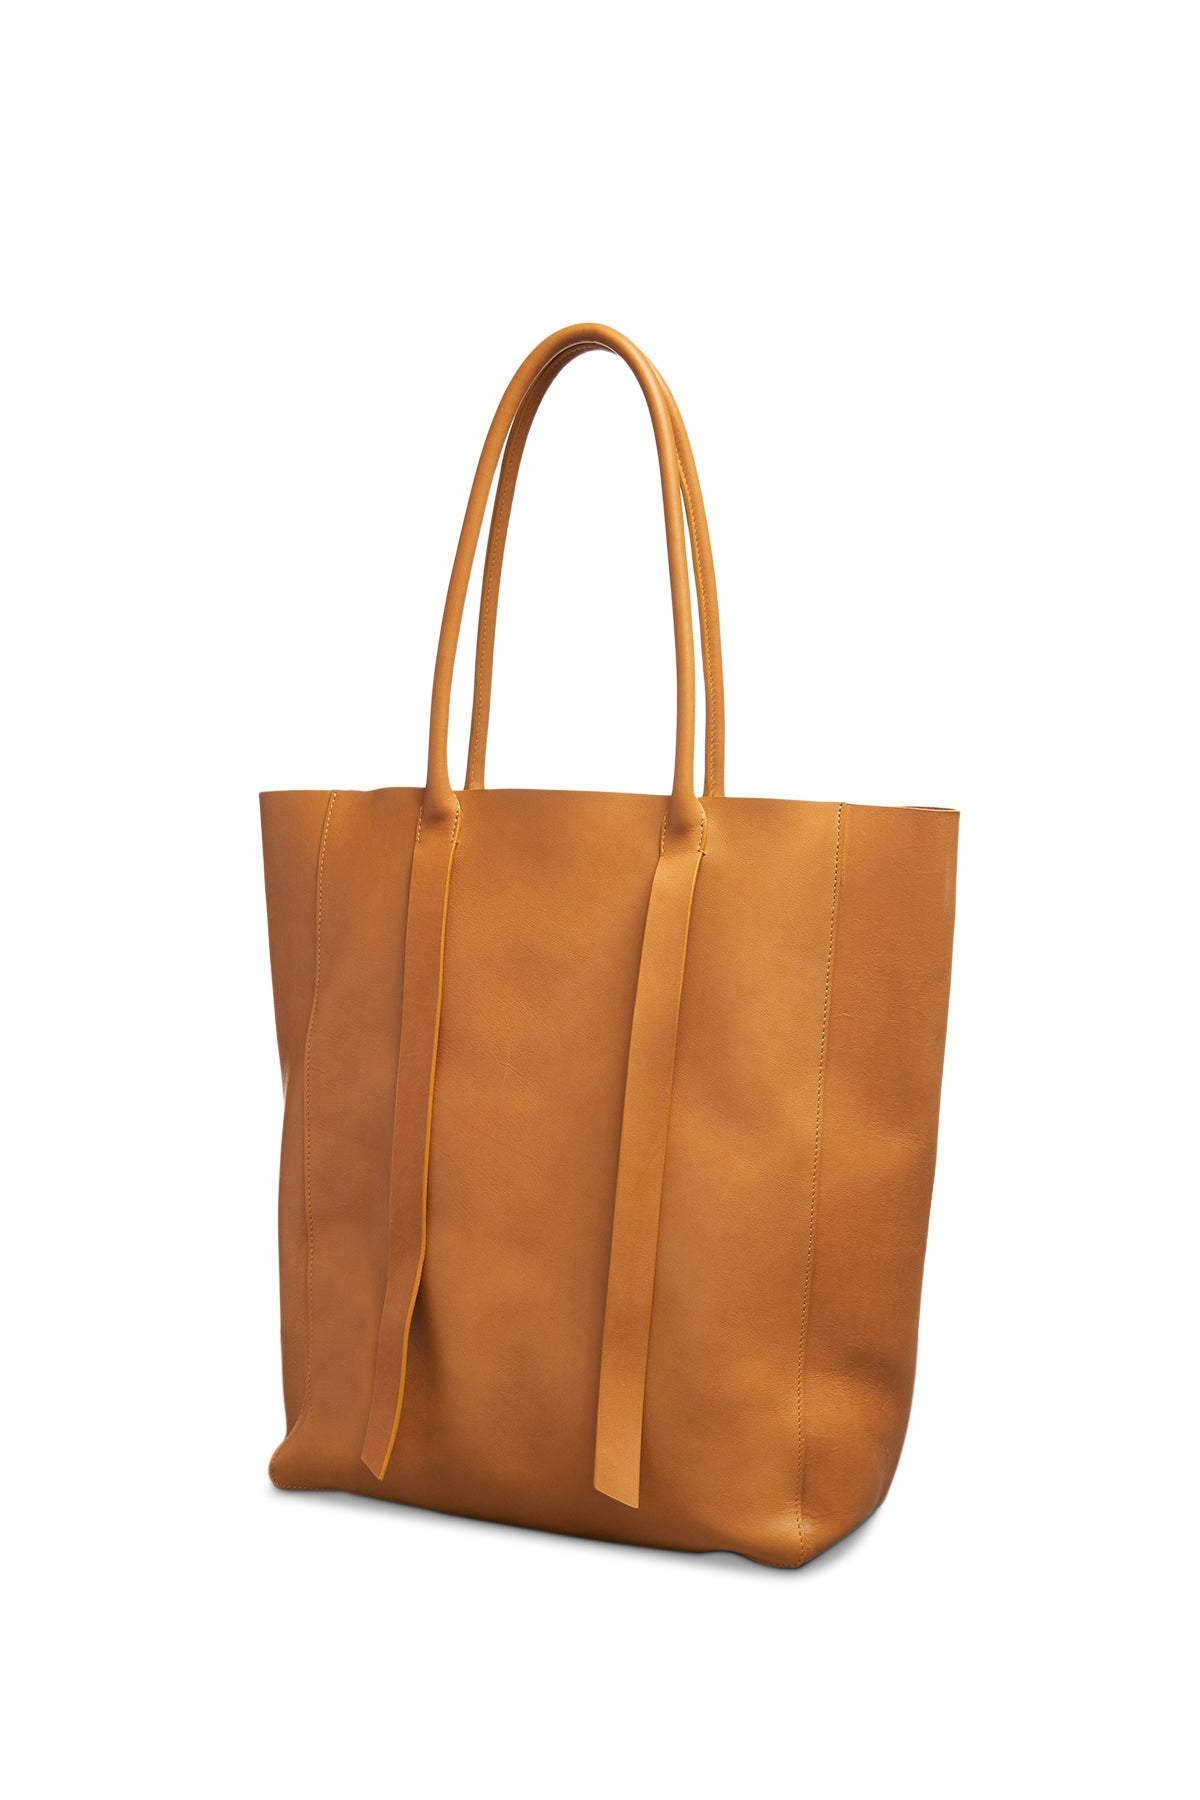 Marianne Tote Bag in Golden Birch Leather